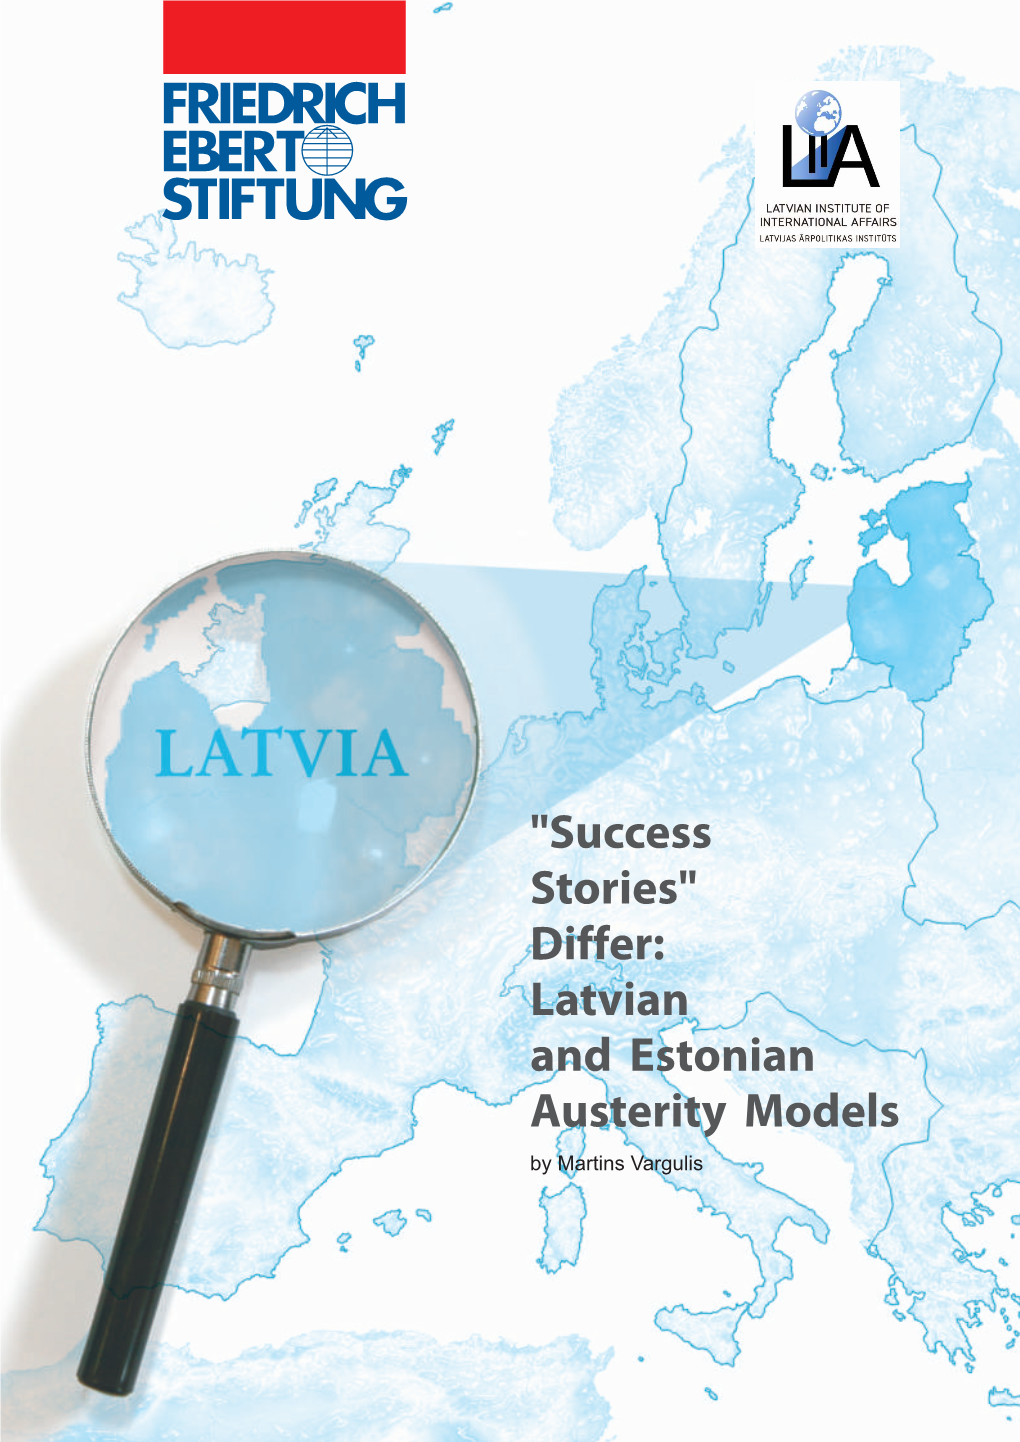 Latvian and Estonian Austerity Models by Martins Vargulis "Success Stories" Differ: Latvian and Estonian Austerity Models